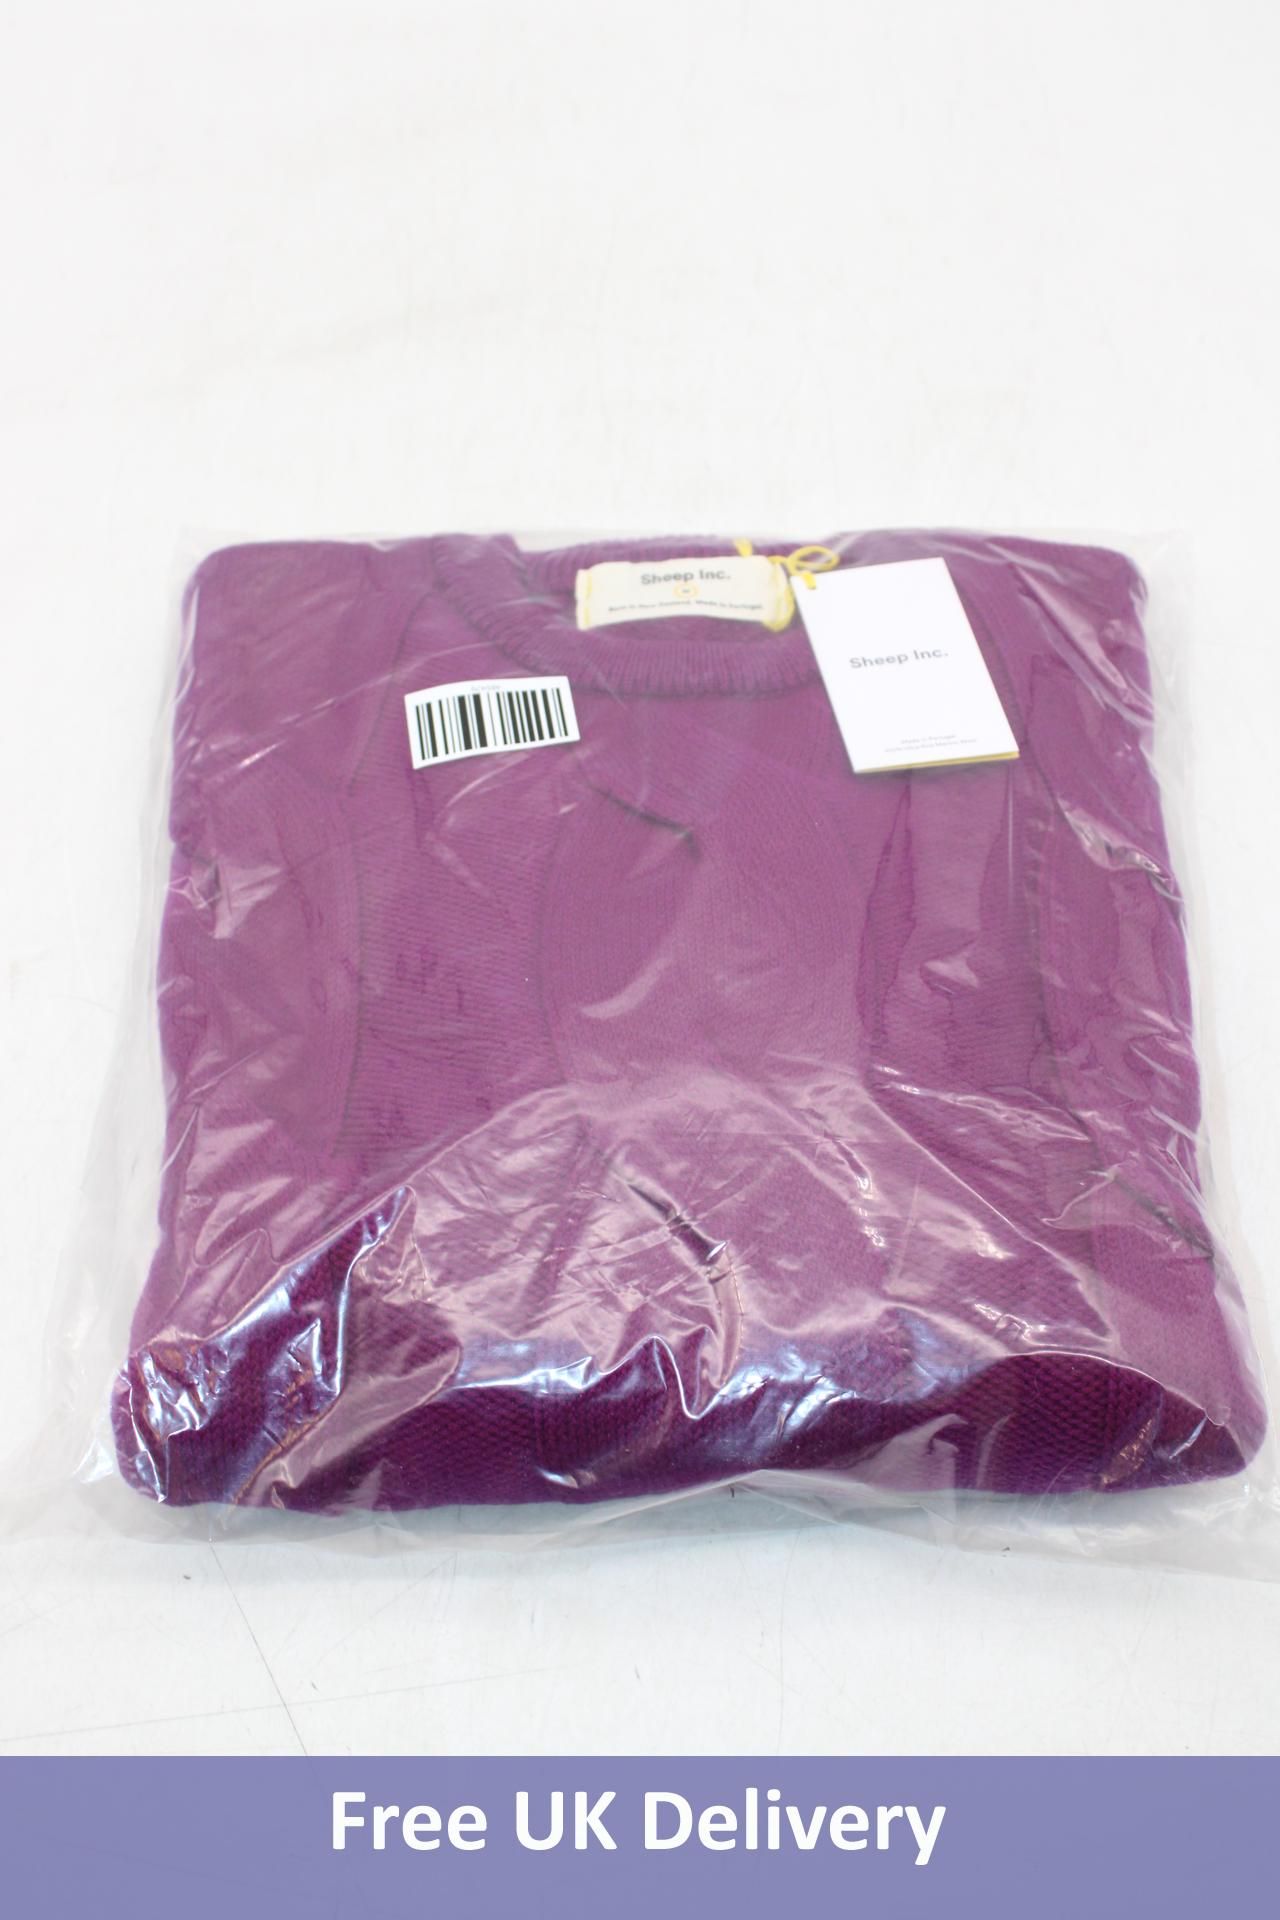 Sheep Inc The Cable Knit Jumper, Royal Purple, Size M